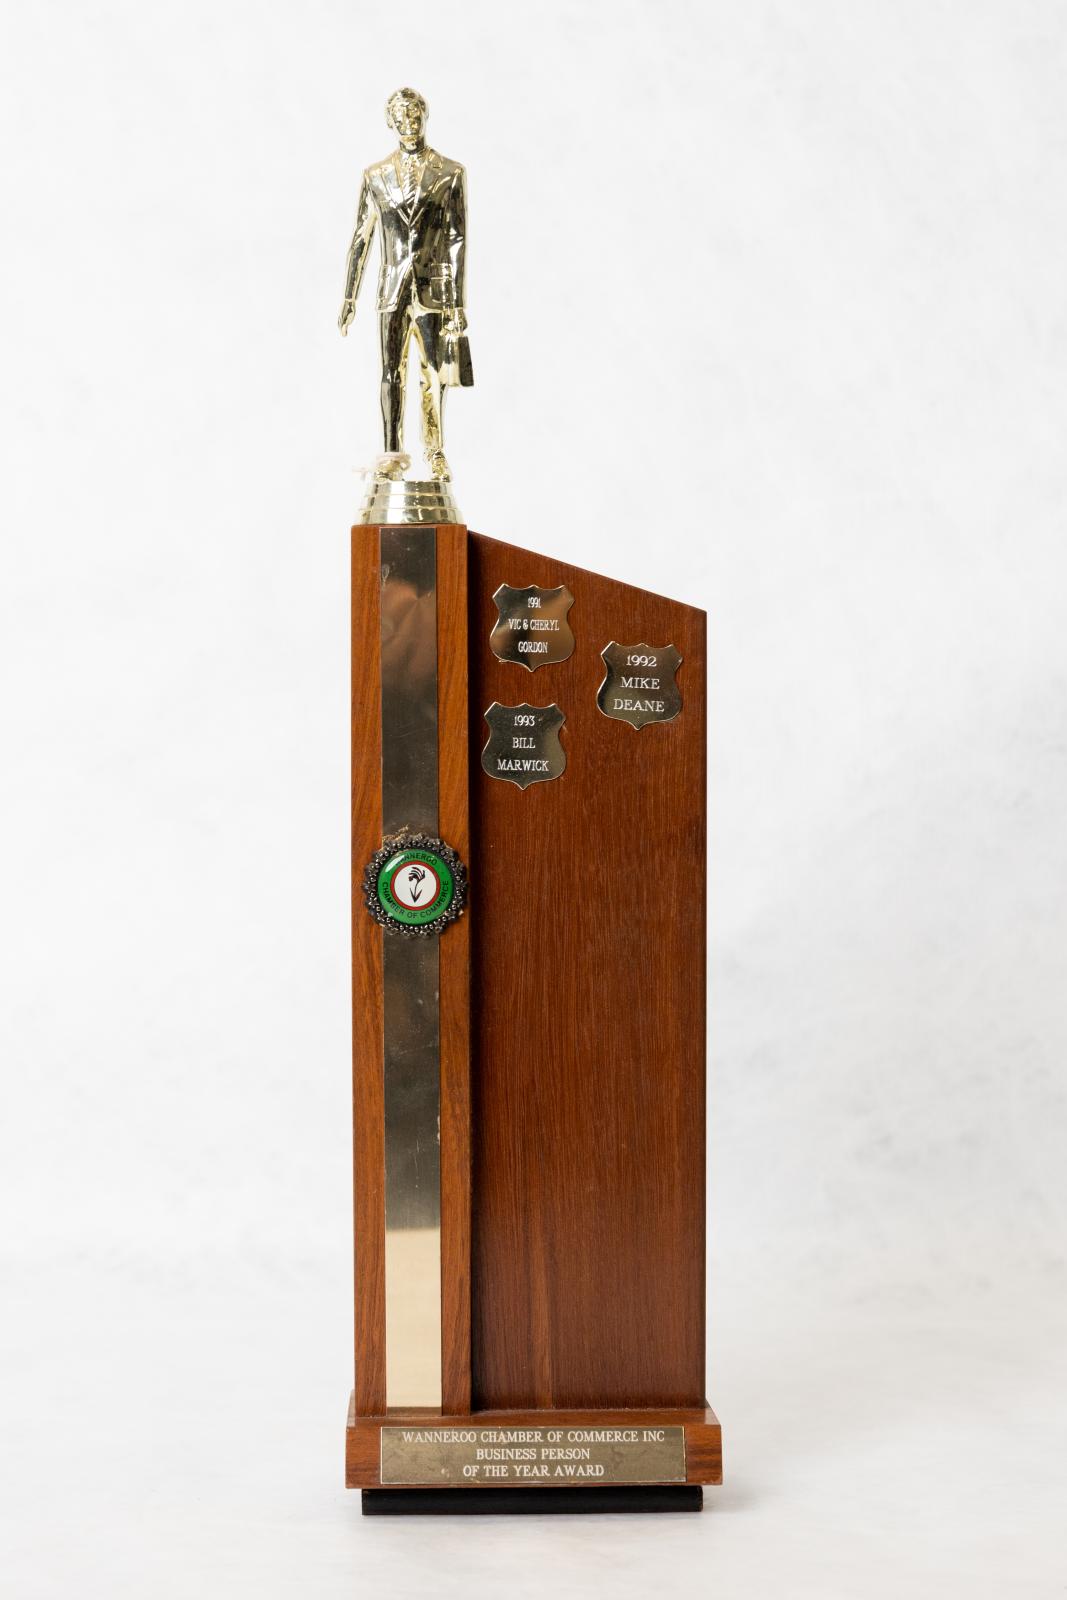 A perpendicular Jarrah timber trophy with gold metal shields, long metal strip and award details attached with glue to trophy. A plastic gold coloured figurine of a businessman sits on top of the trophy. 